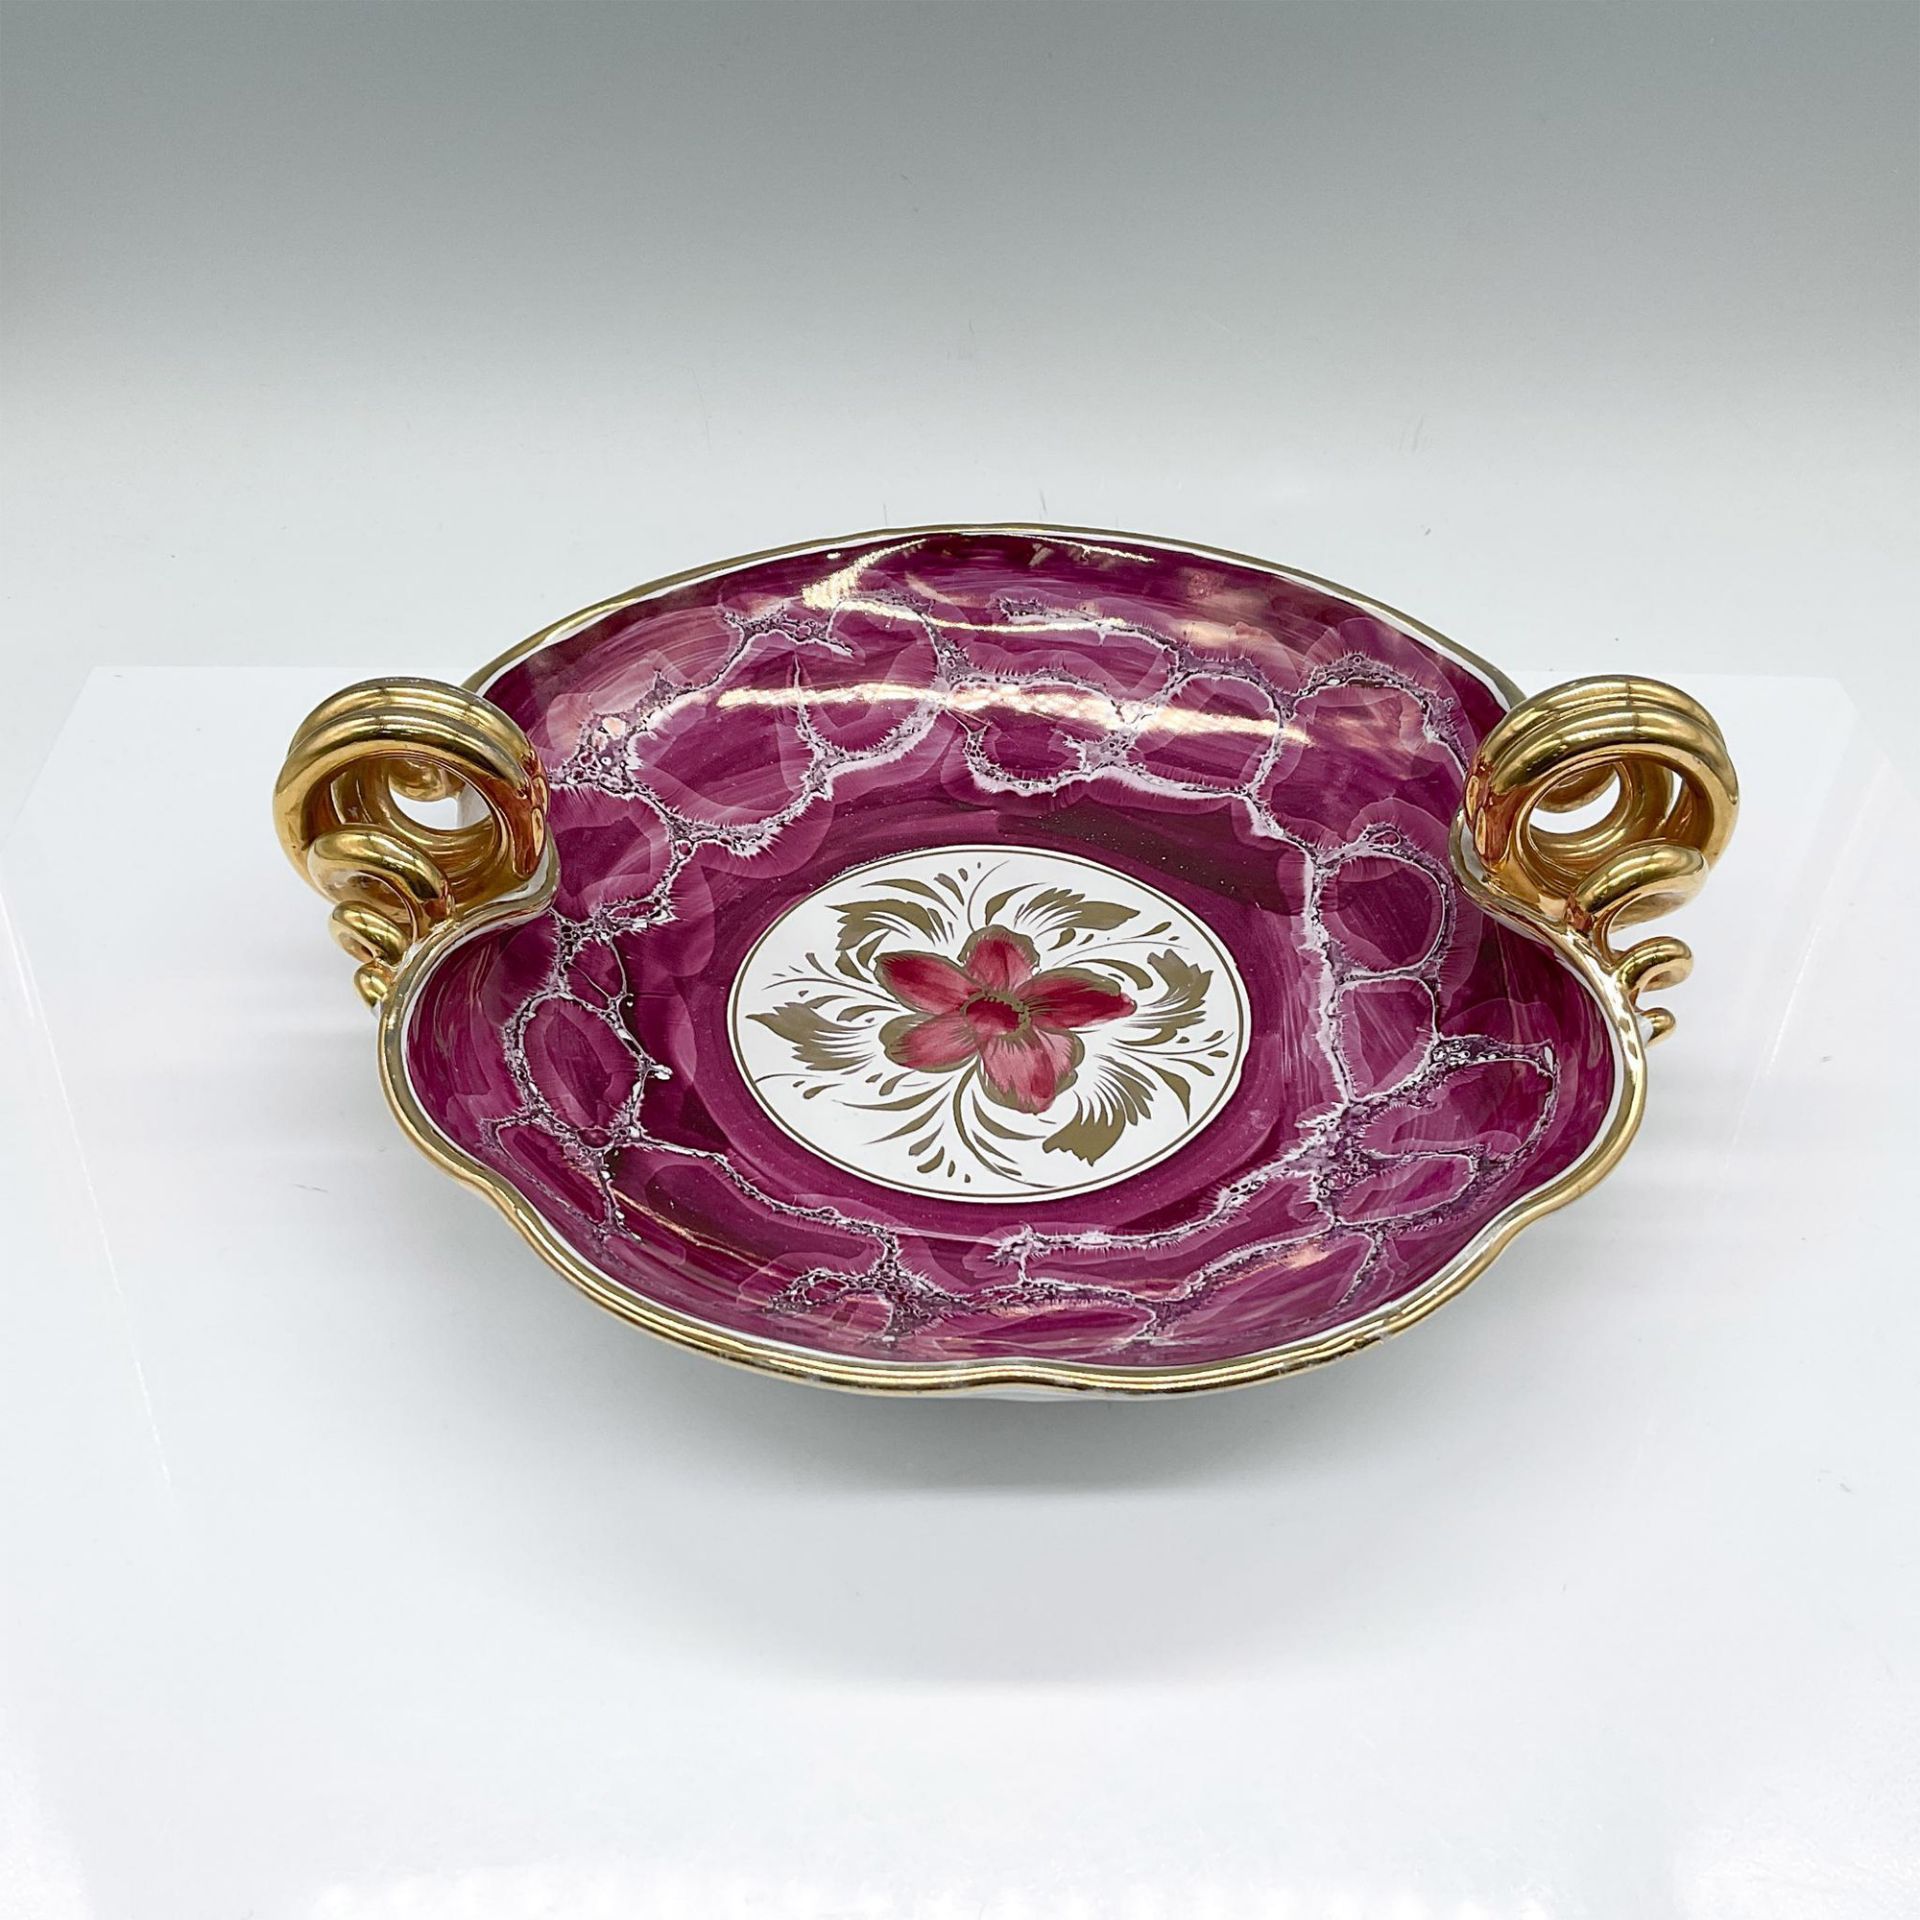 Italian Hand Painted Porcelain Floral Bowl - Image 2 of 3